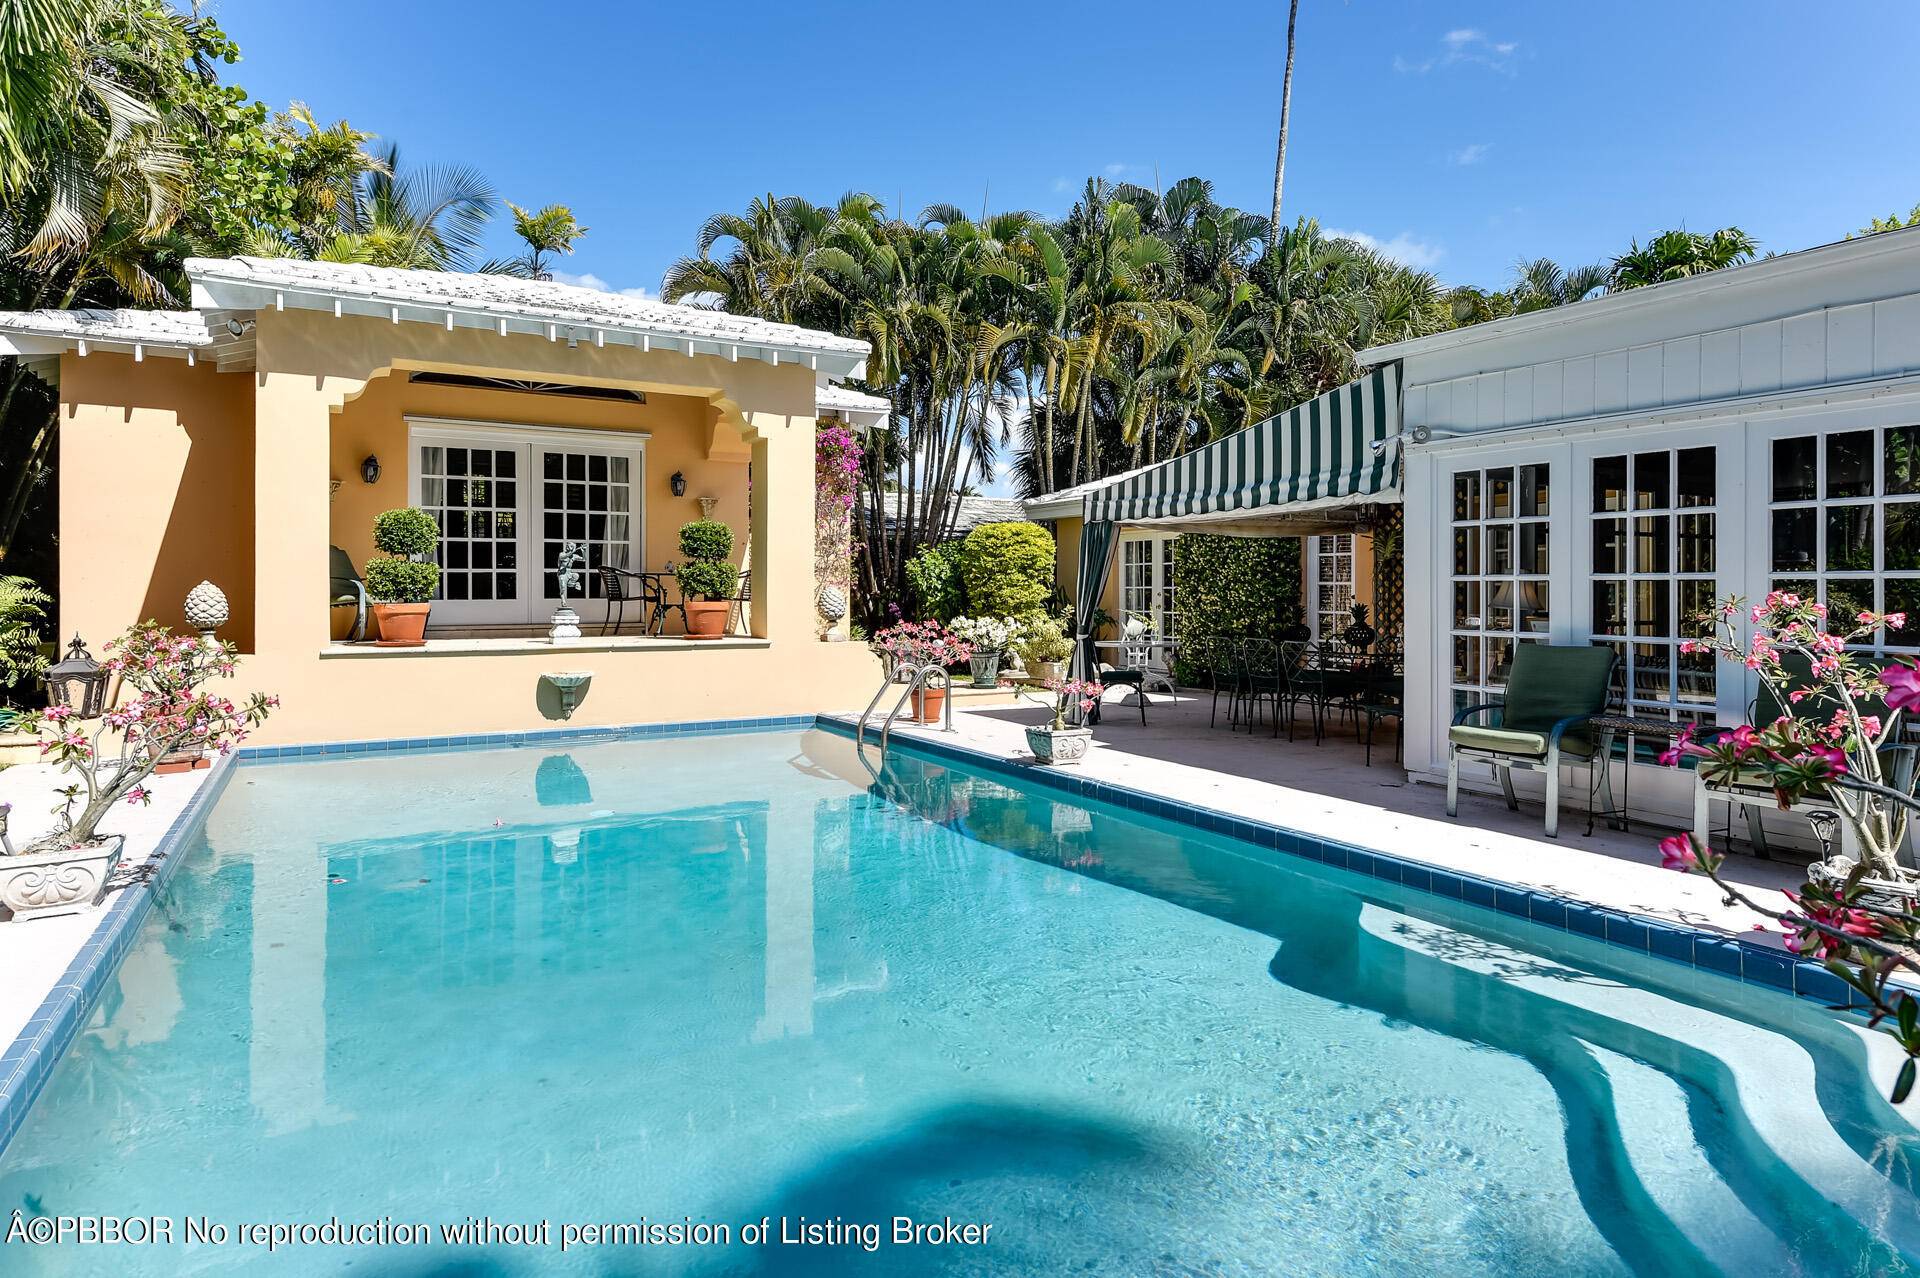 Renovate or build new. Palm Beach pool home offering 3 bedrooms, 3 baths plus a one bedroom guest house with bath and kitchenette.